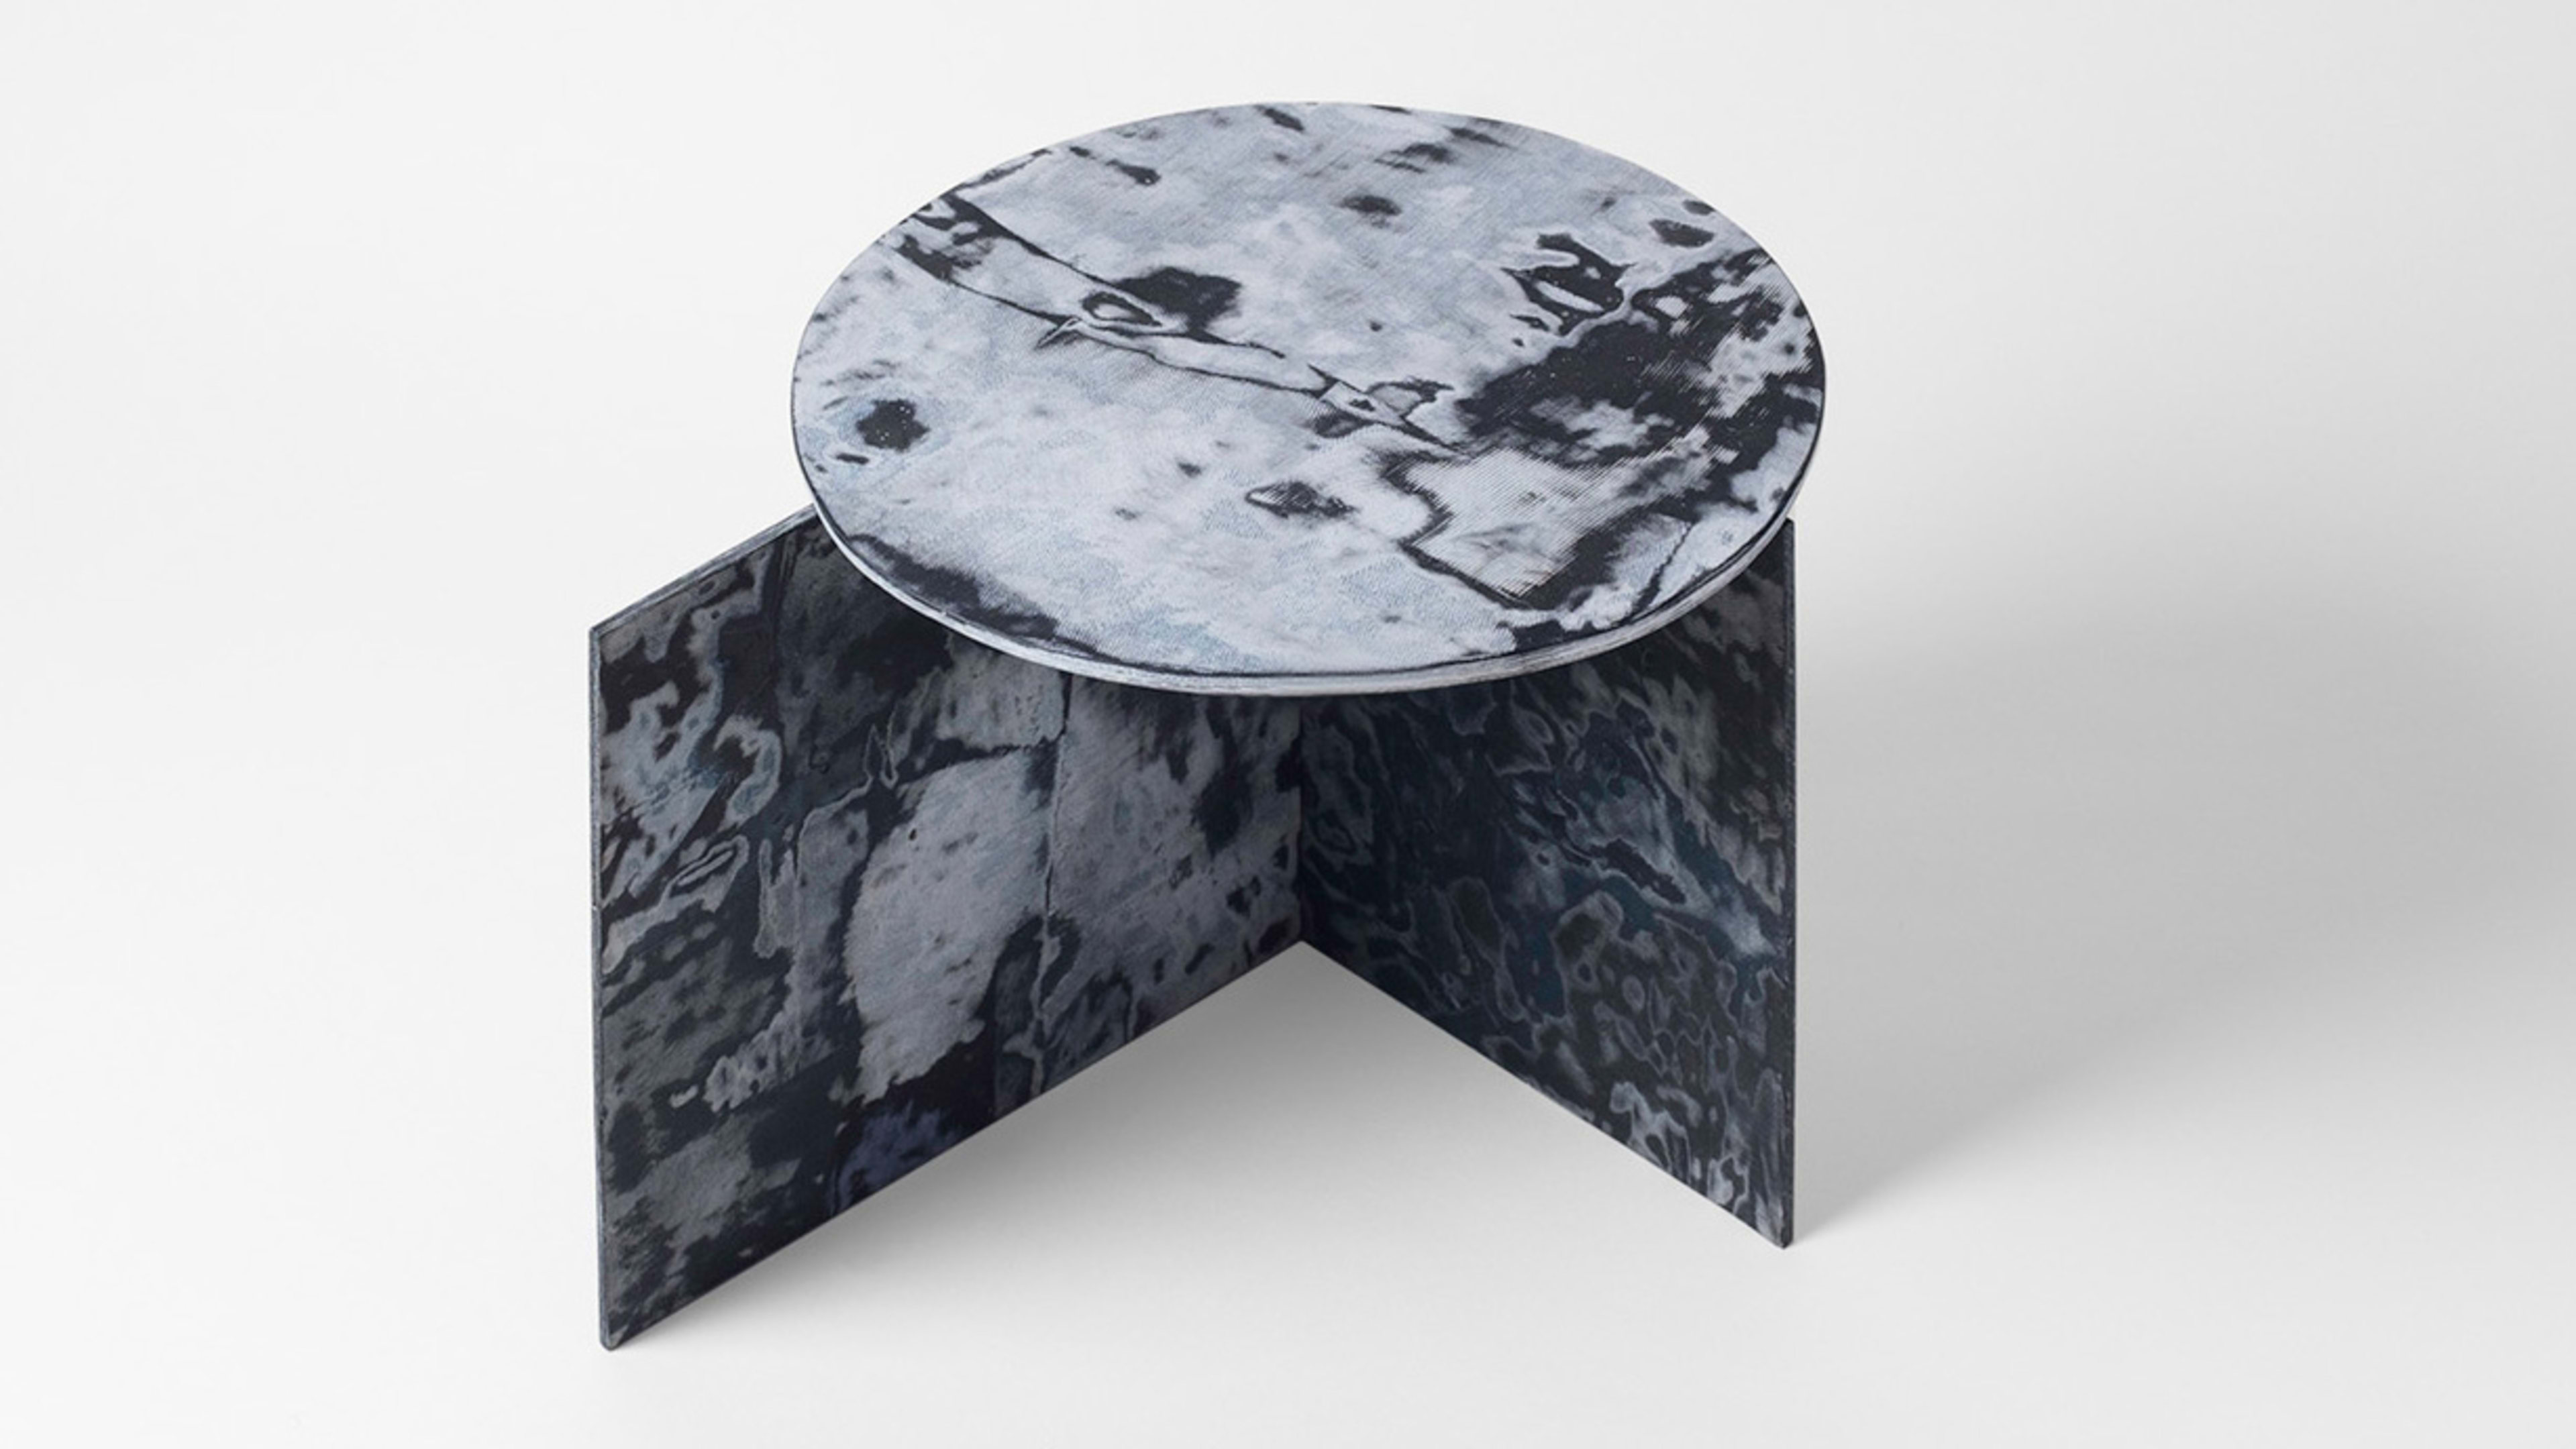 Furniture made out of old jeans is way more beautiful than it sounds